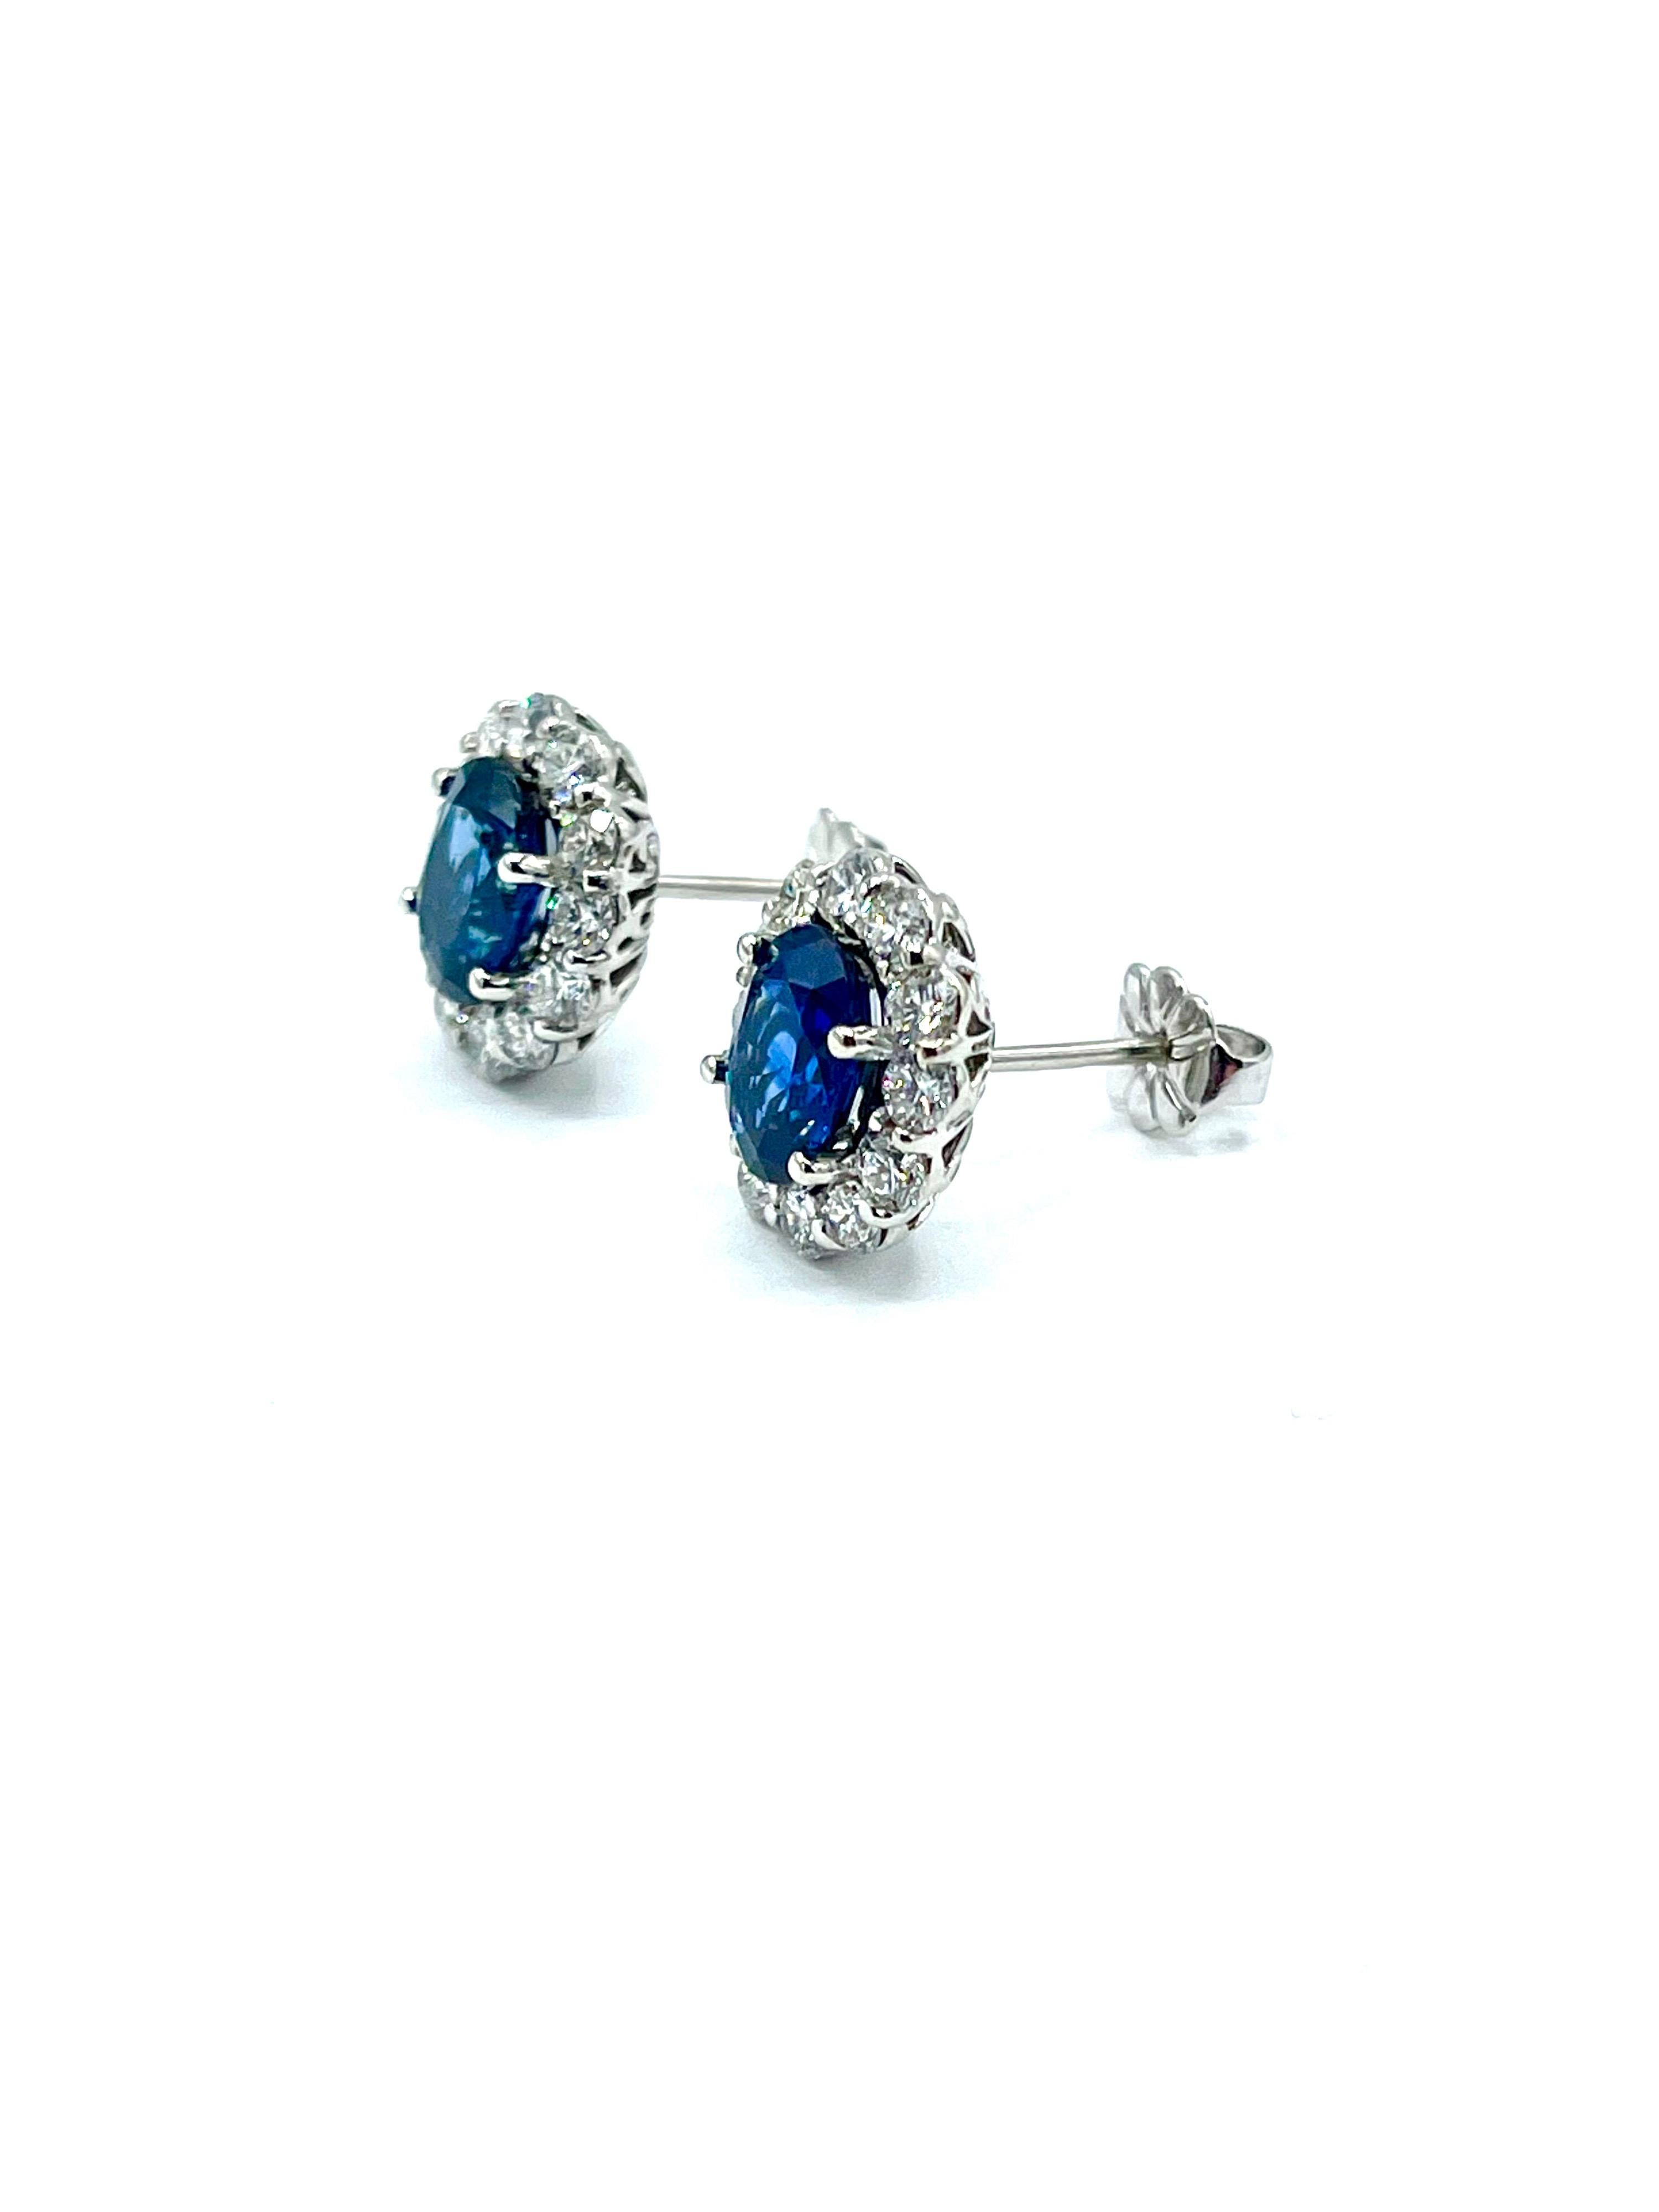 3.16 Carat Oval Sapphires and Round Brilliant Diamond White Gold Stud Earrings For Sale 2